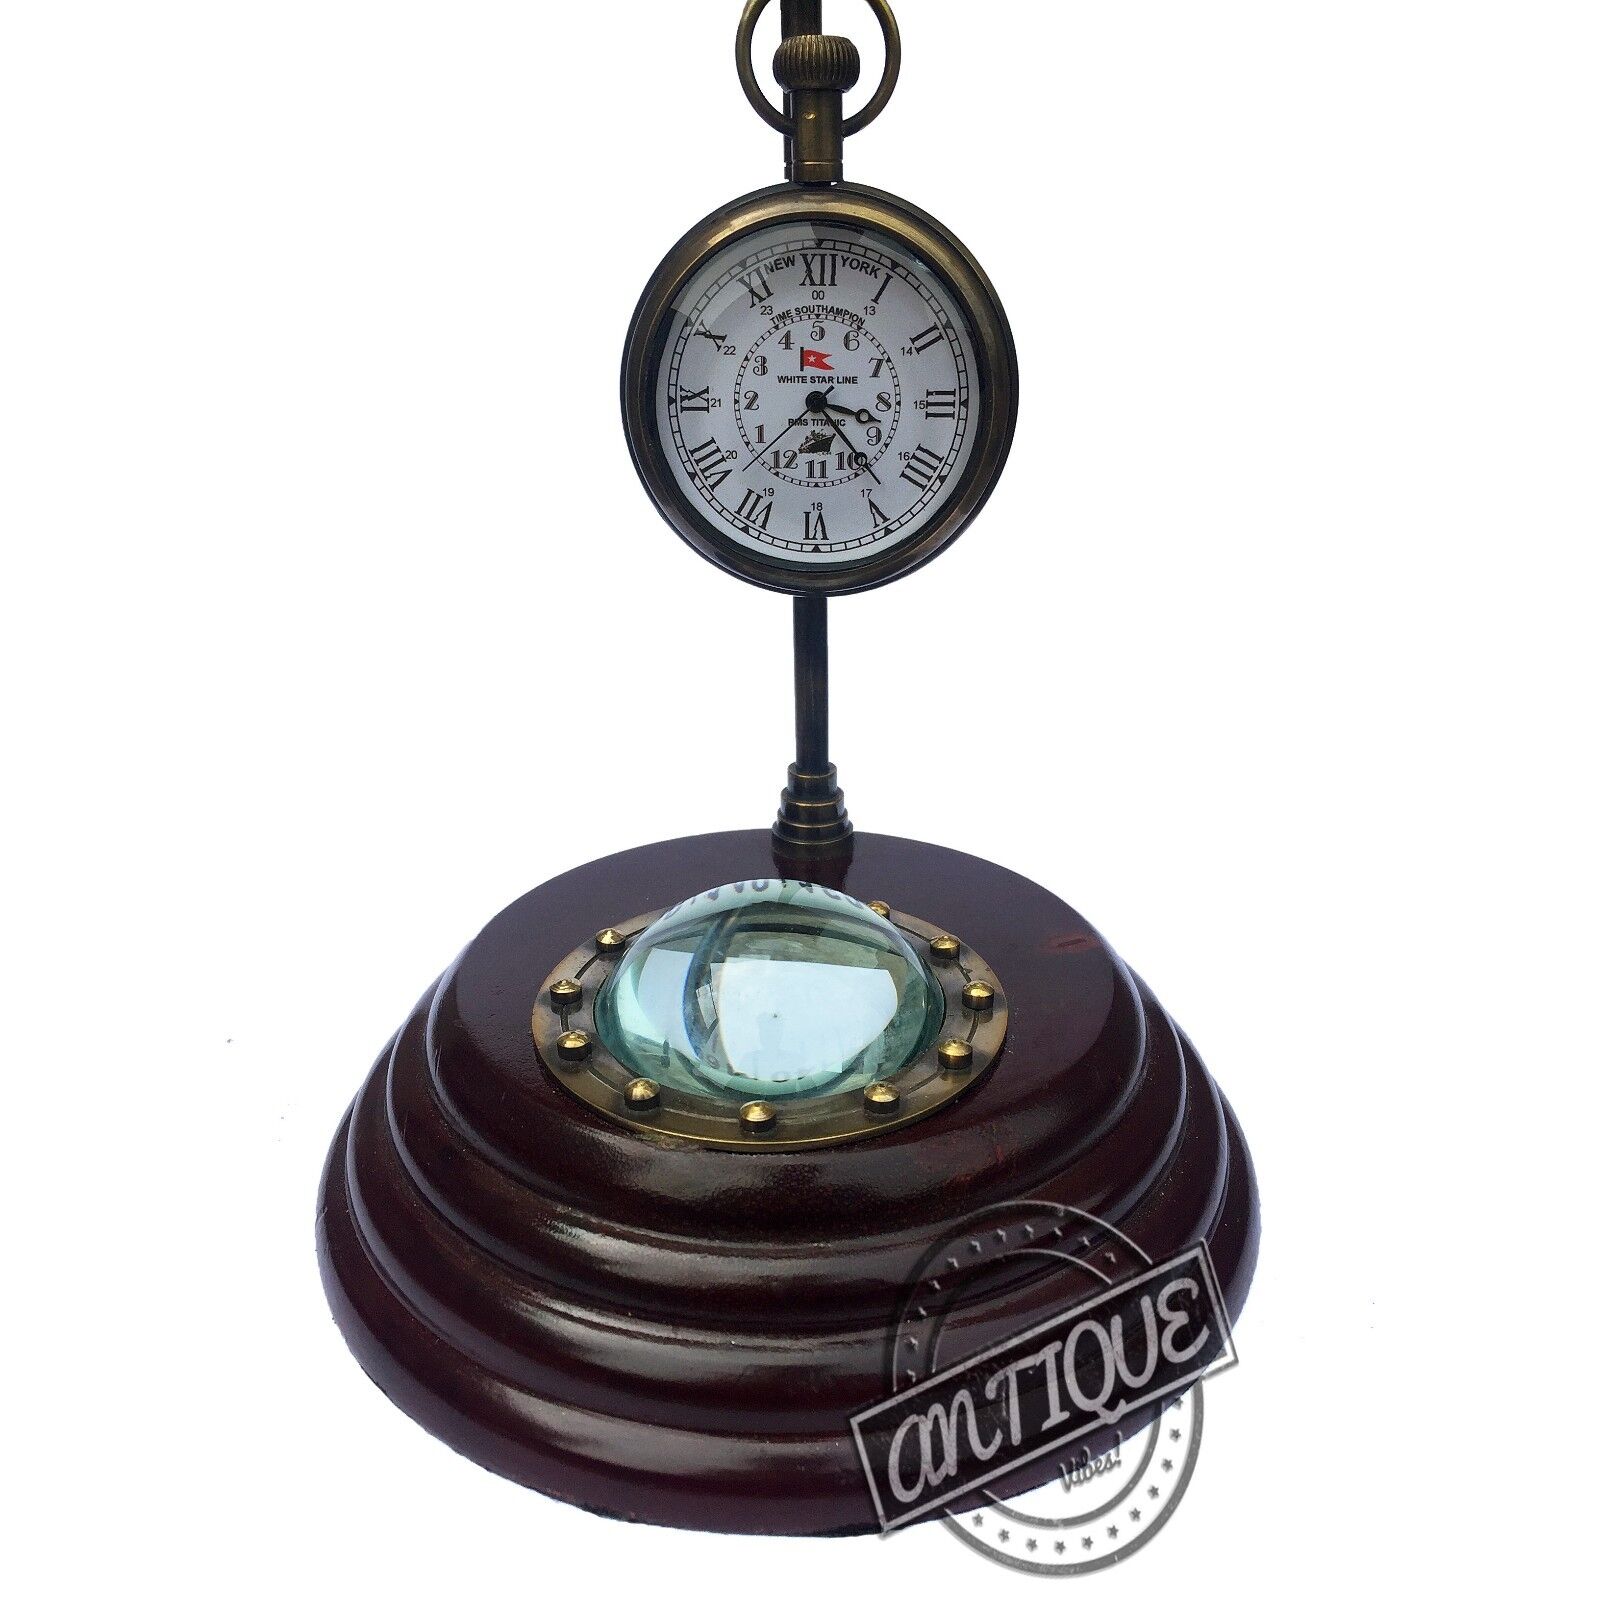 Vintage Antique Style Clocks Wooden Table Top Retro Home/Office